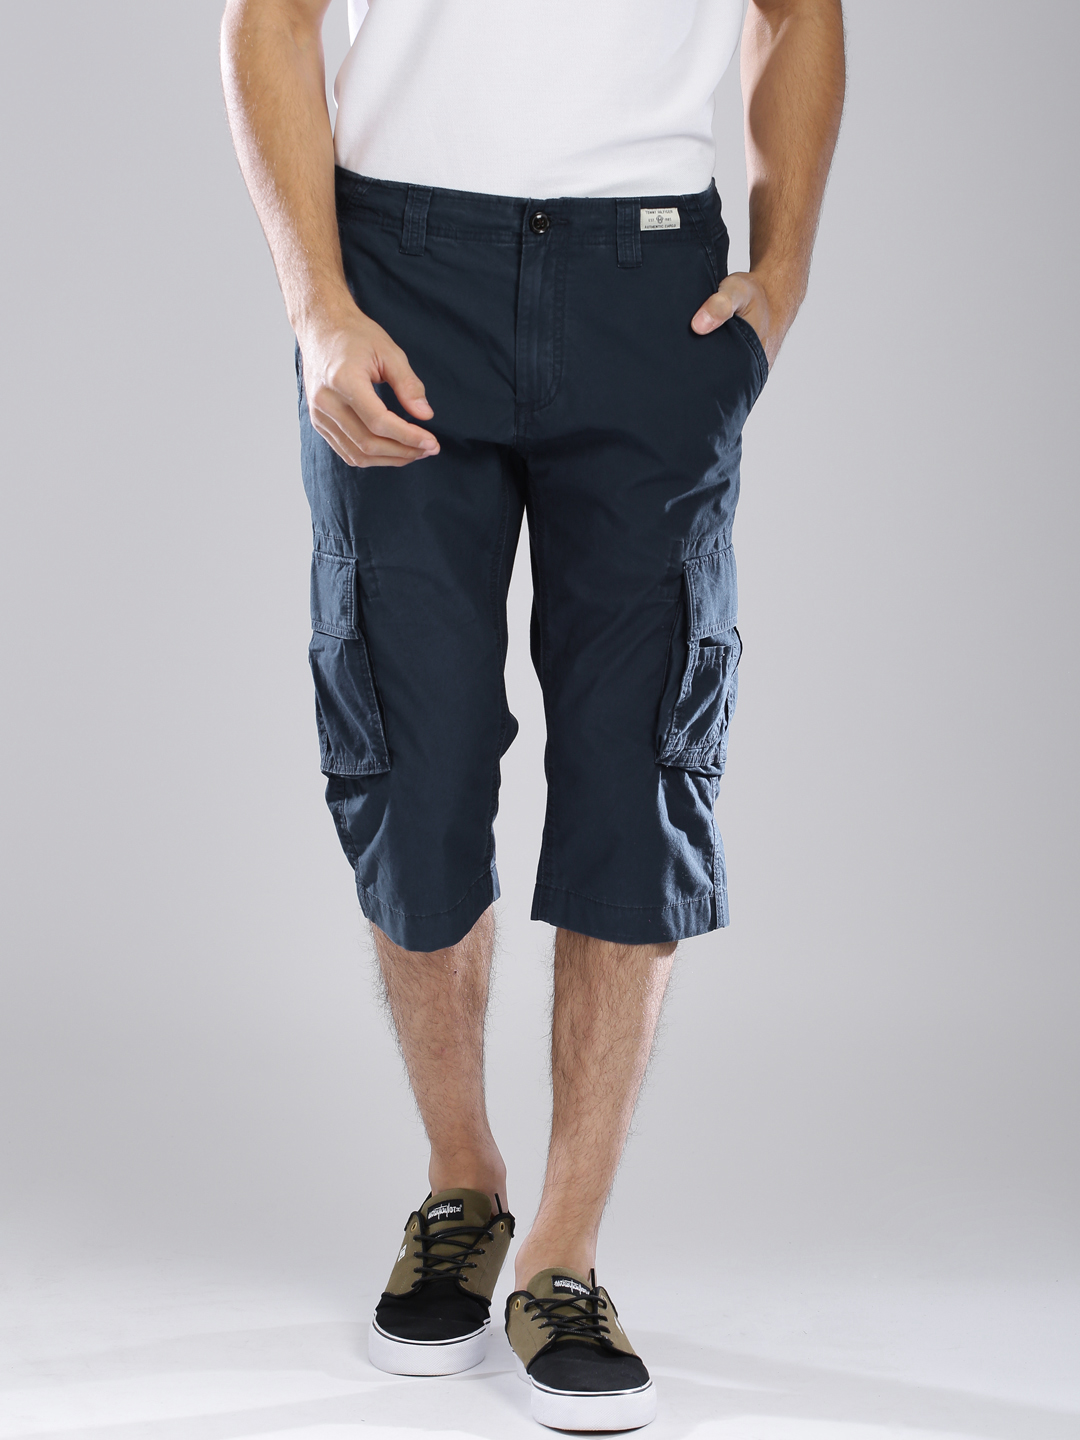 Tommy Hilfiger Navy Relaxed Fit Cargo Shorts